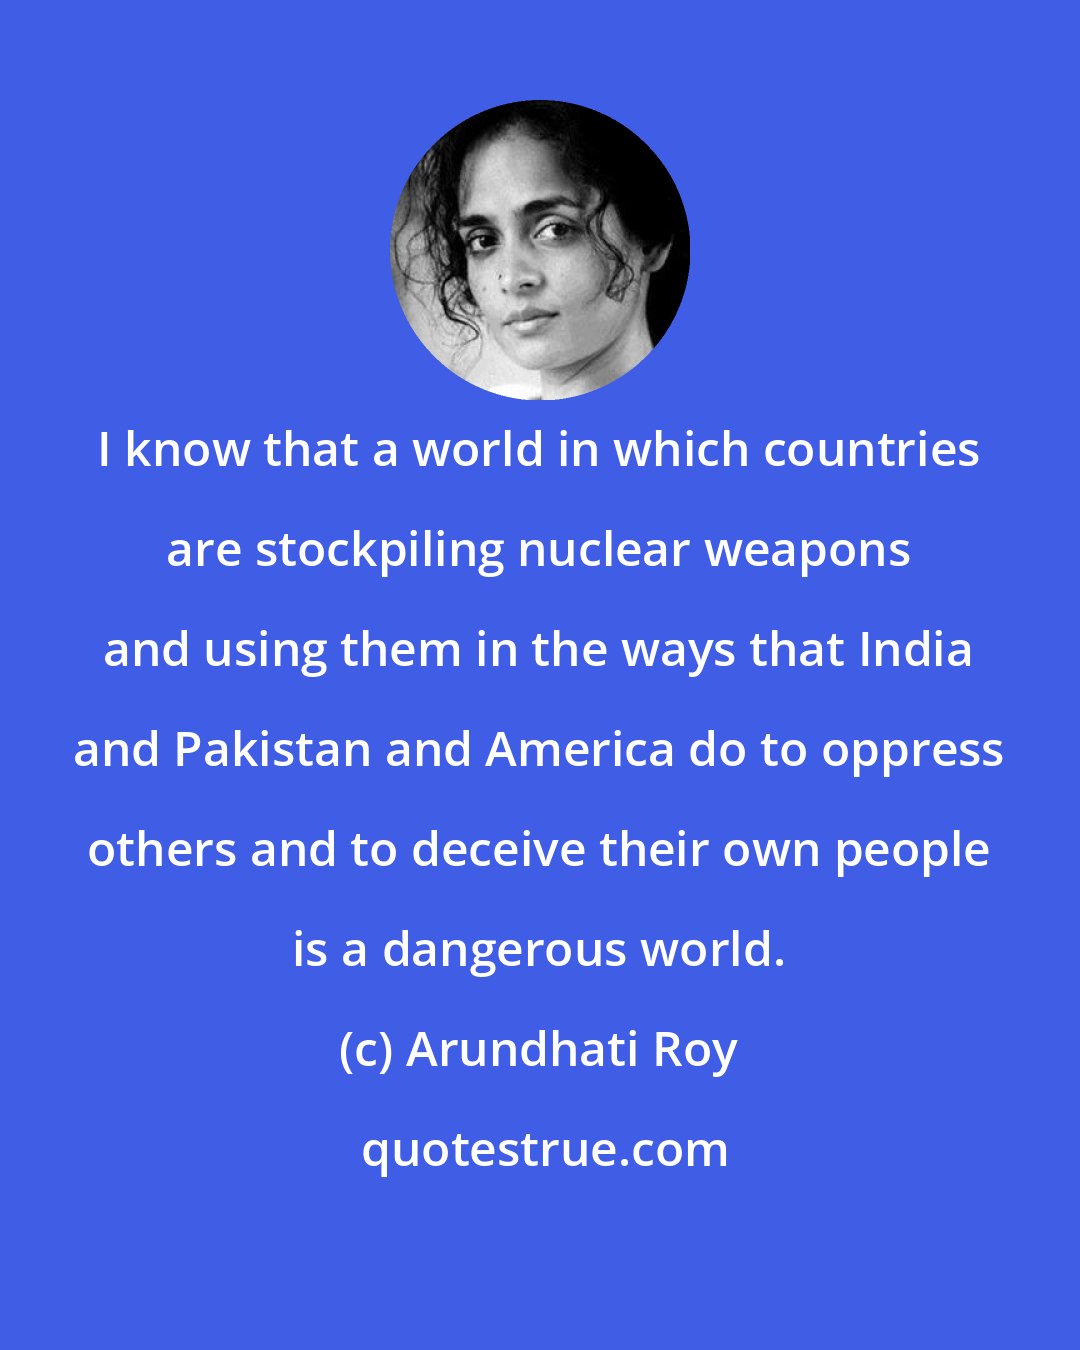 Arundhati Roy: I know that a world in which countries are stockpiling nuclear weapons and using them in the ways that India and Pakistan and America do to oppress others and to deceive their own people is a dangerous world.